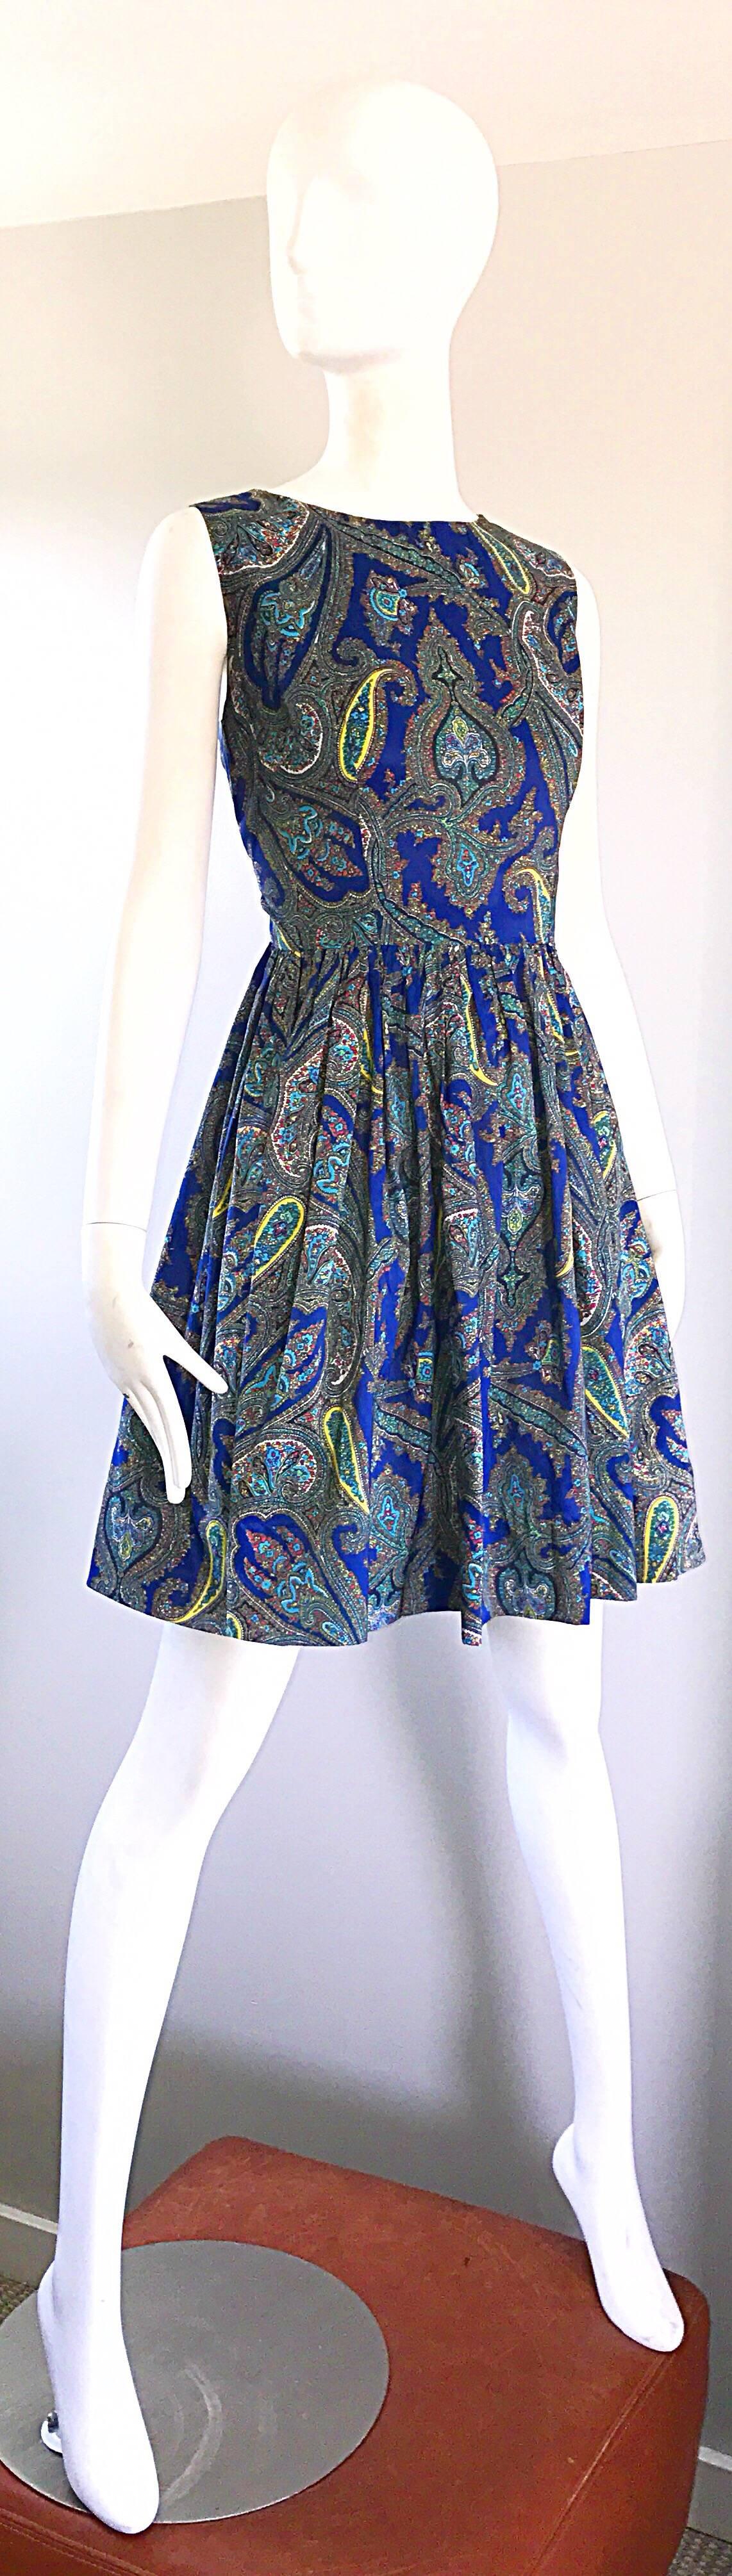 Women's 1950s Gorgeous Blue Paisley Fit n' Flare Vintage 50s Sleeveless Silk Dress For Sale